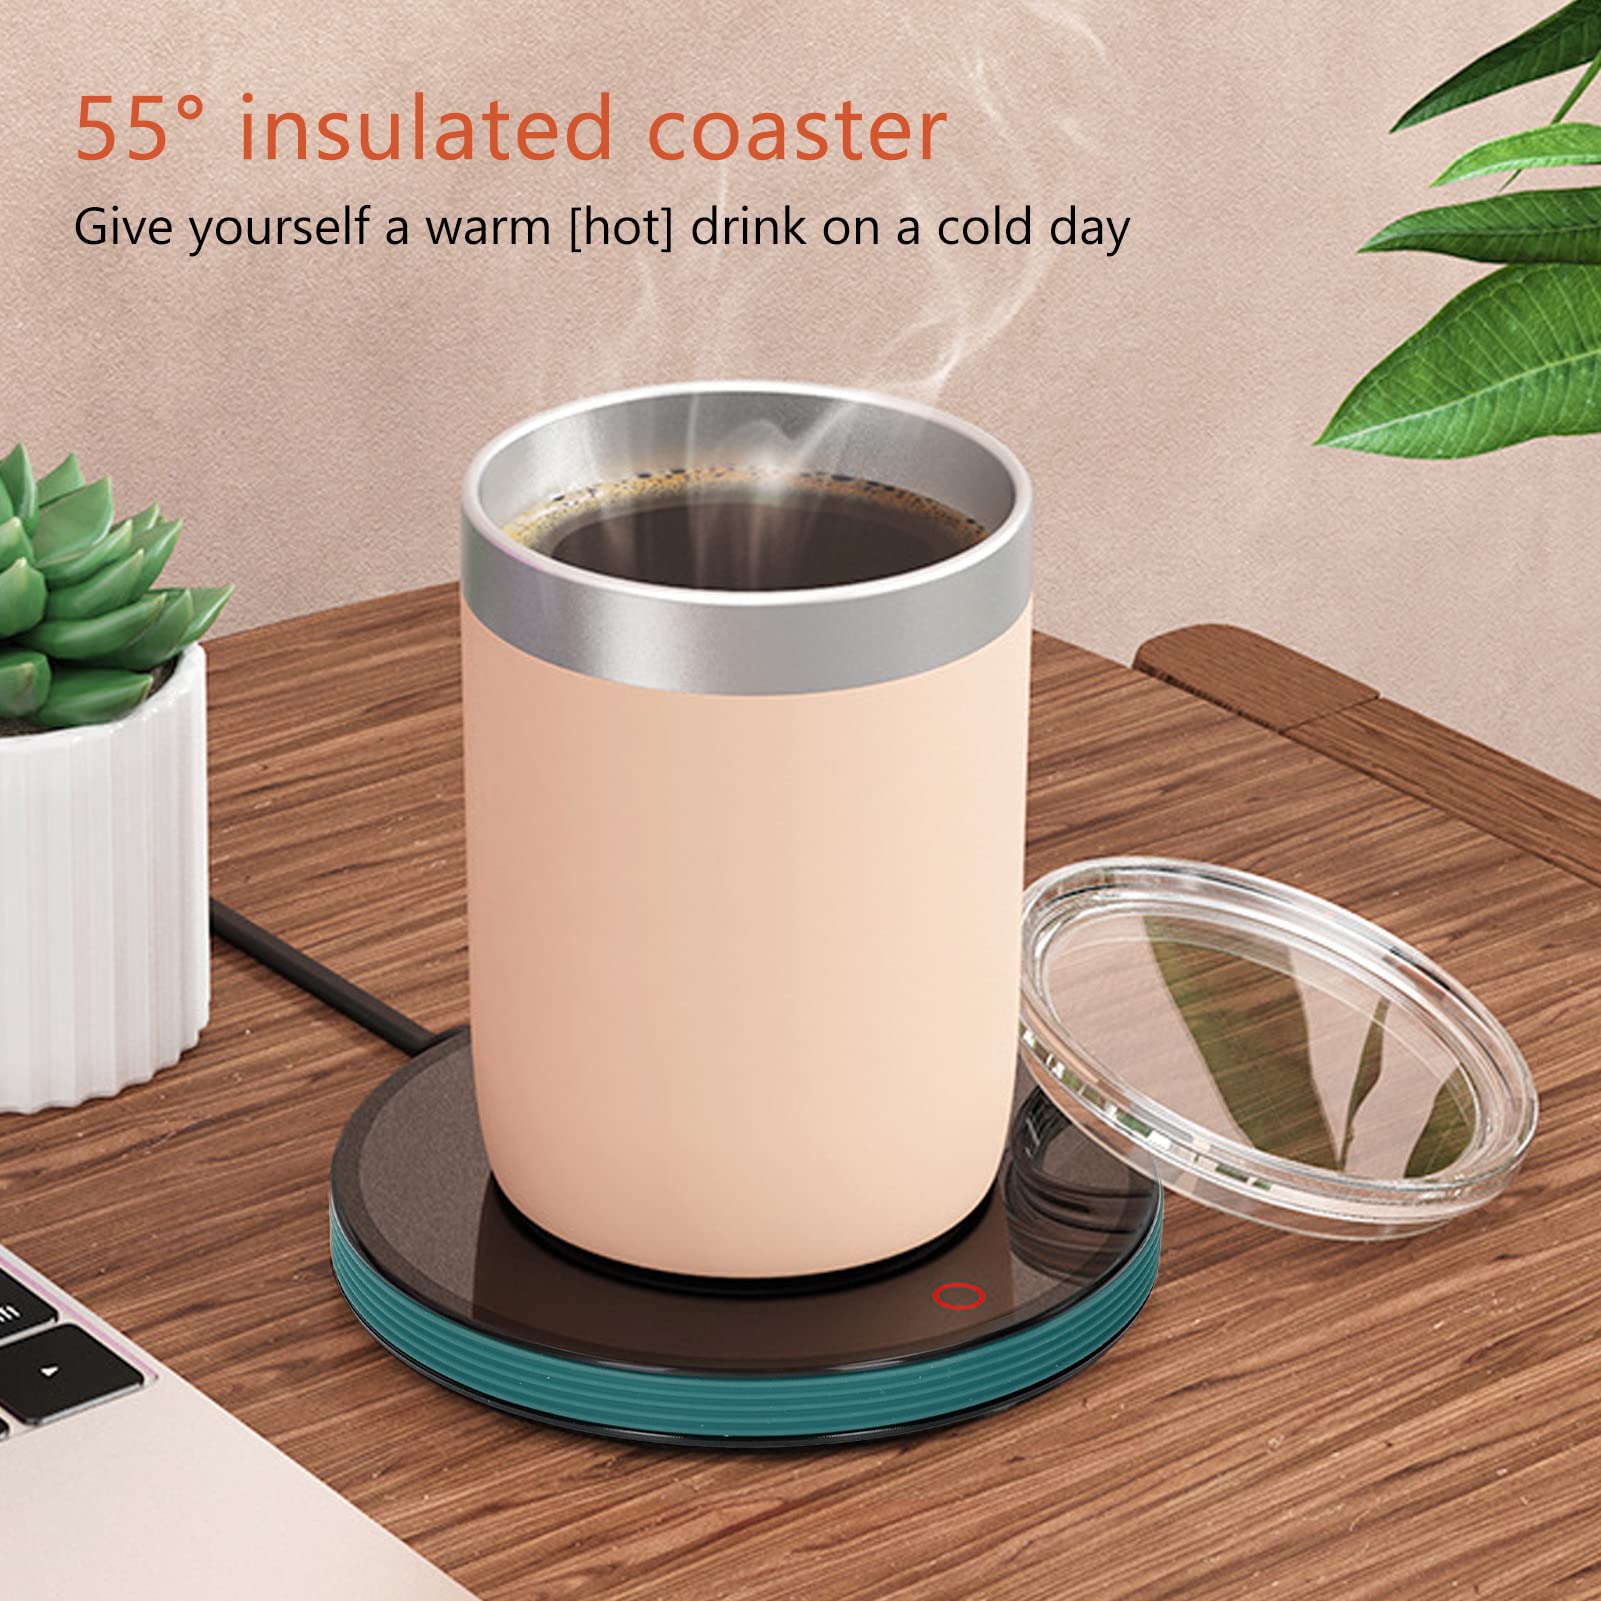 Coffee Mug Warmer for Home Office Desk Smart Temperature Settings Electric Beverage Tea Water Milk Warmer for All Cups and Mugs Heating Plate Candle Wax Warmer(Blackish Green)